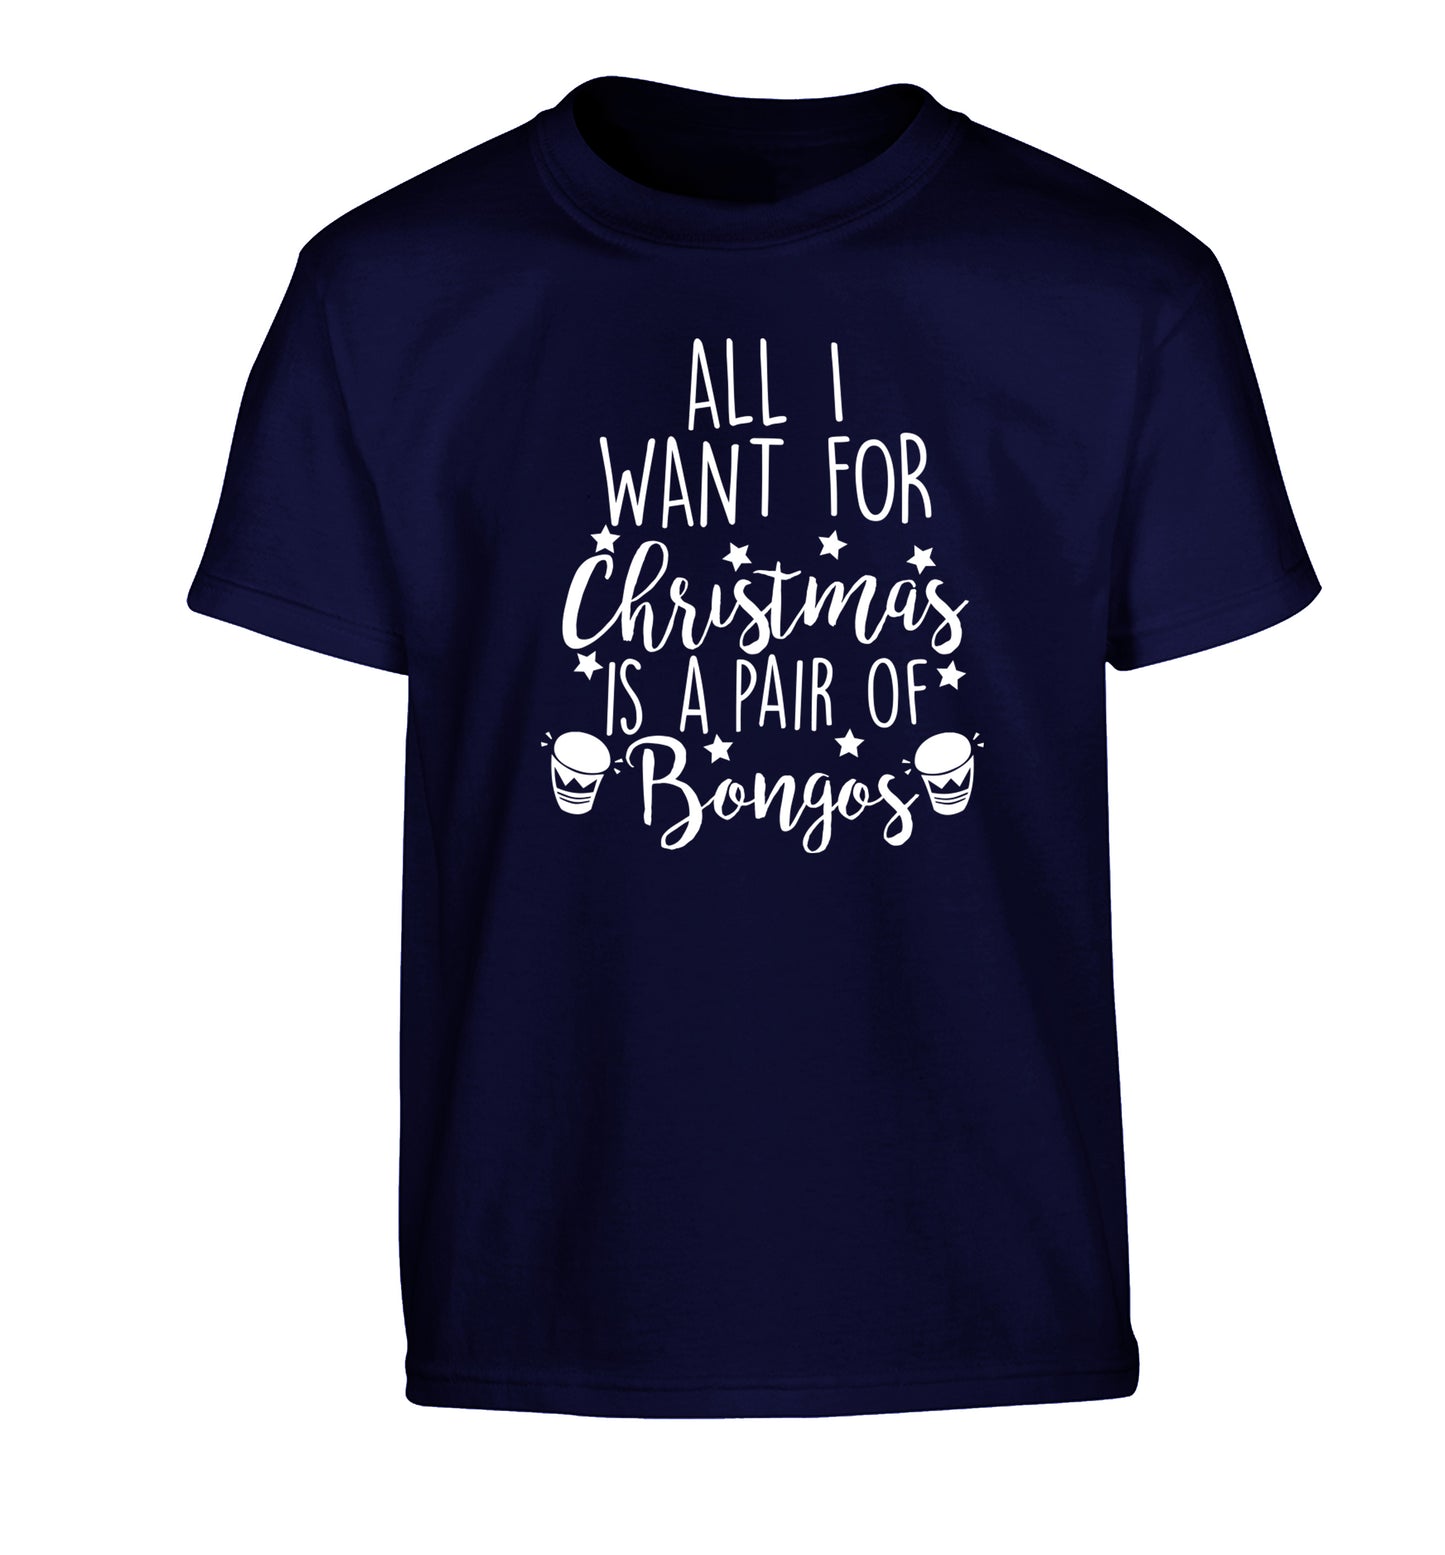 All I want for Christmas is a pair of bongos! Children's navy Tshirt 12-14 Years